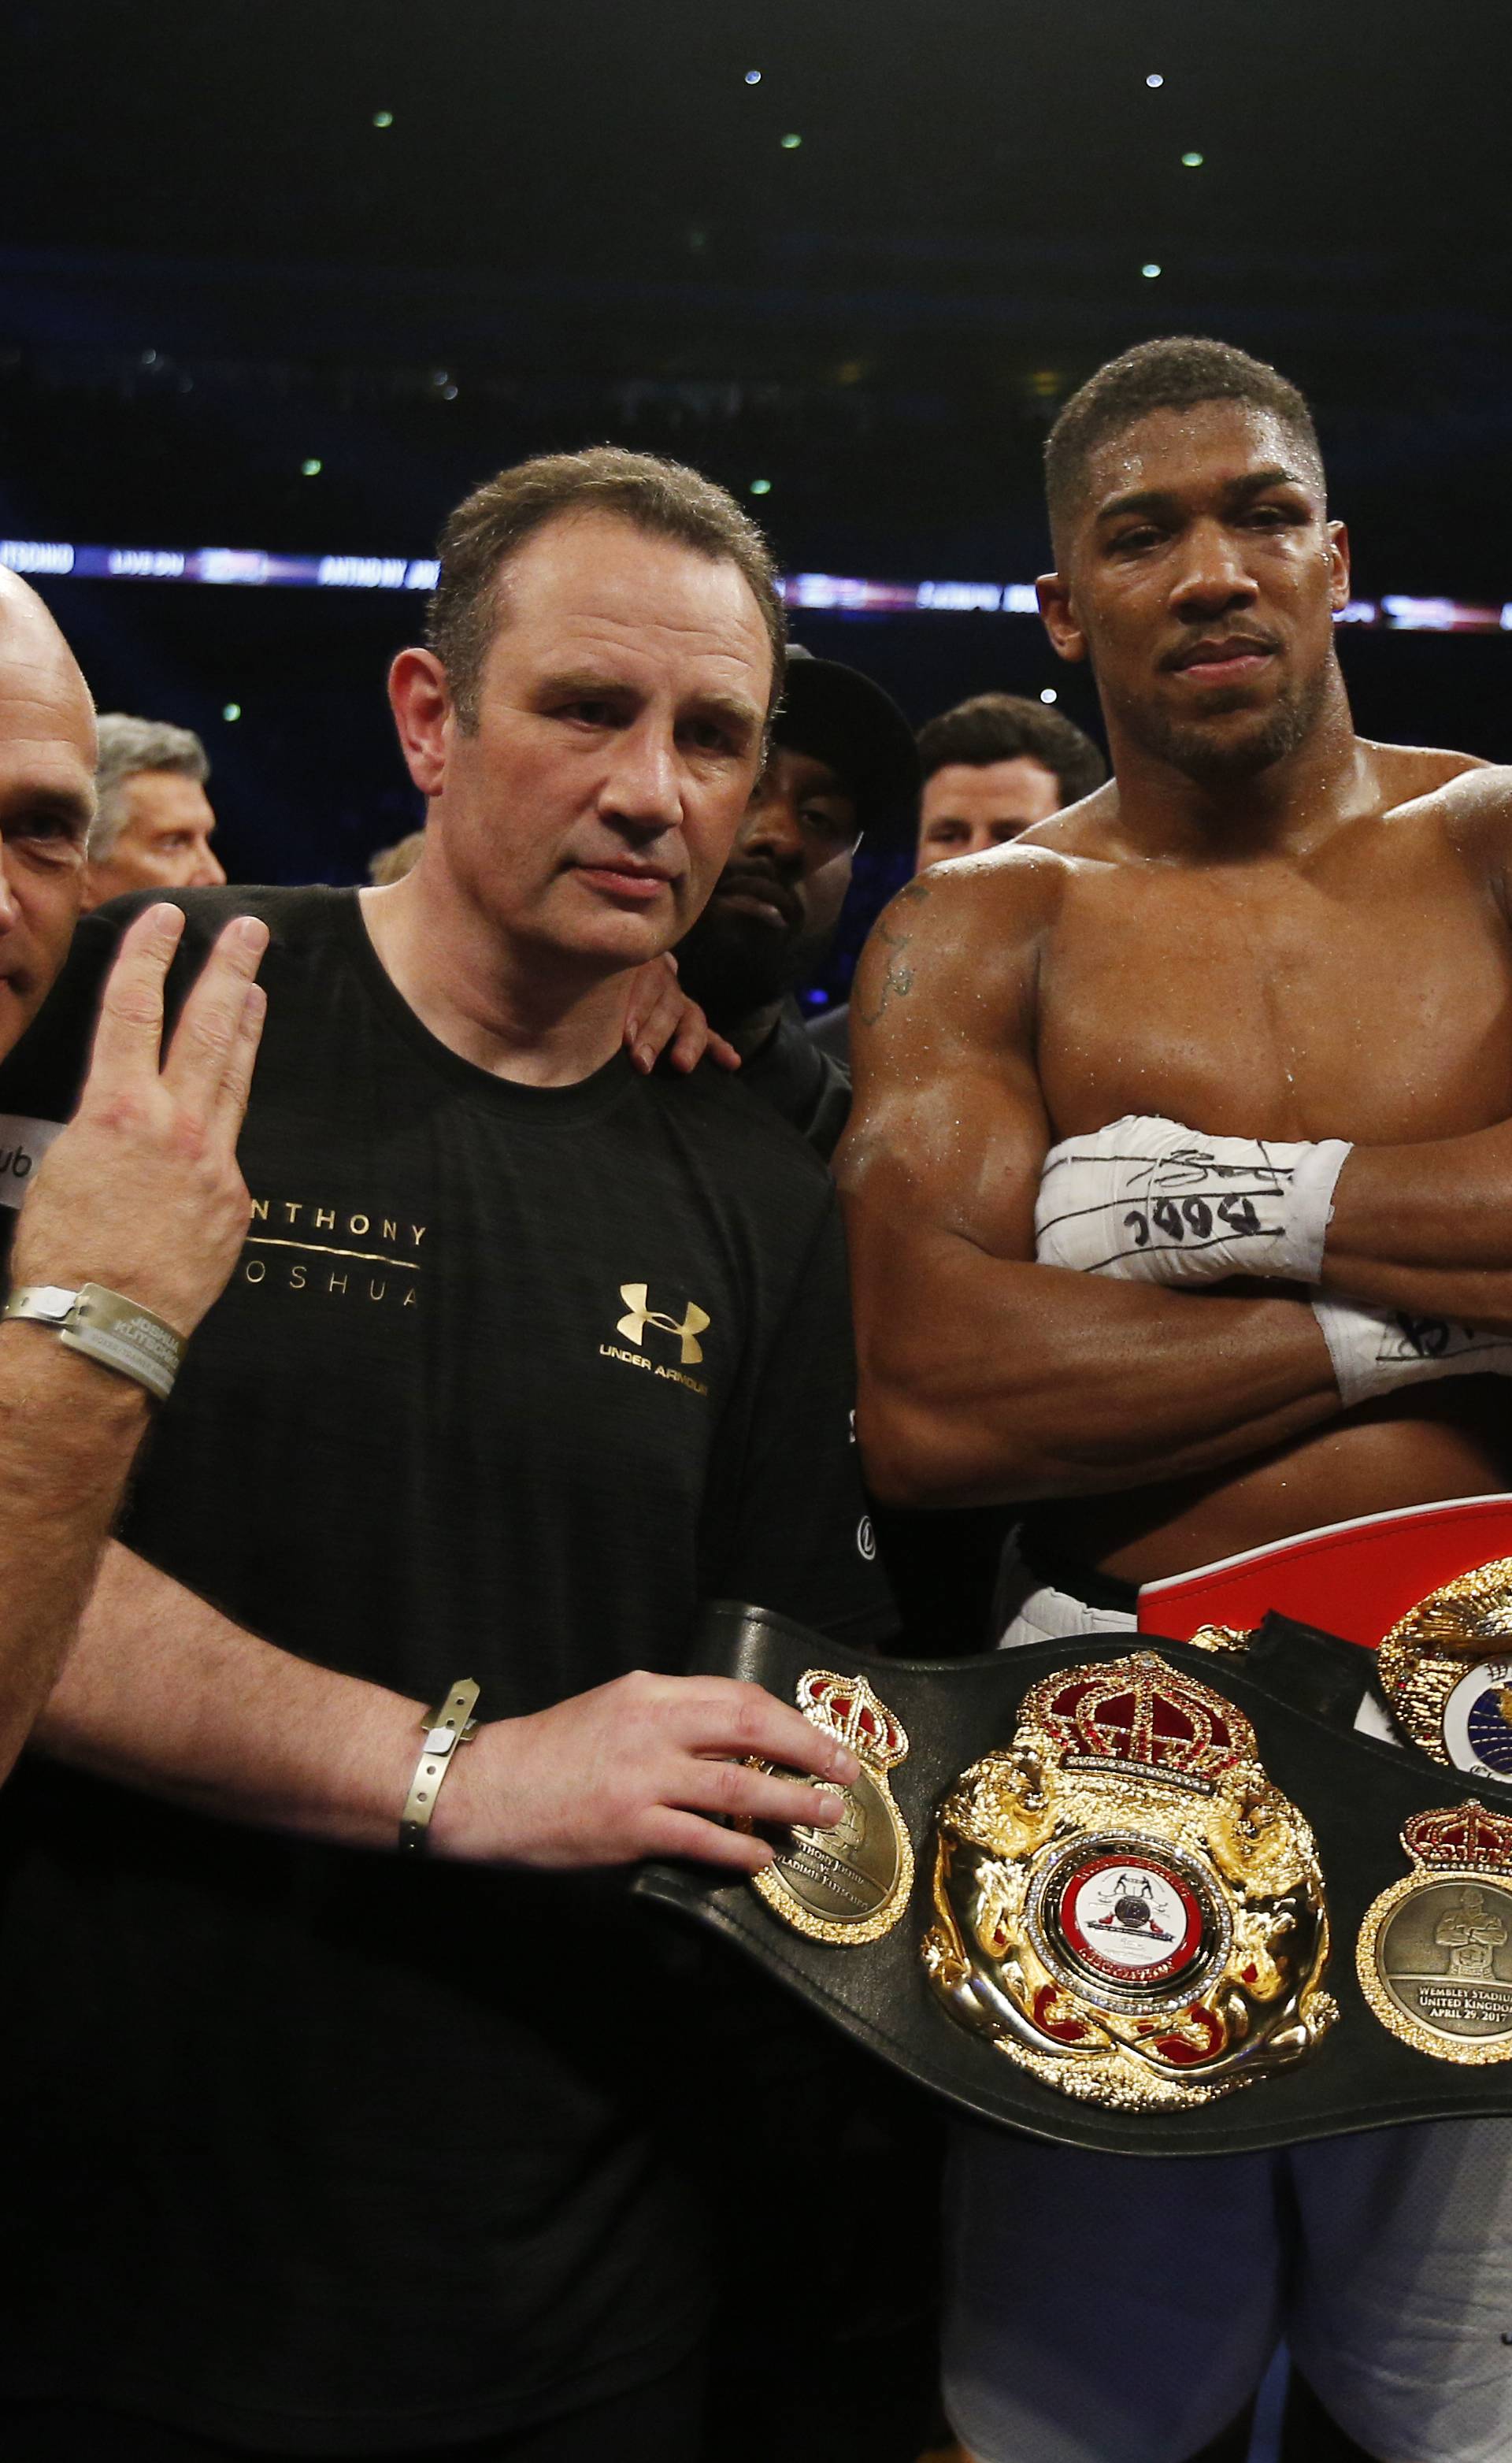 Anthony Joshua celebrates with trainer Robert McCracken, promoter Eddie Hearn and his corner after winning the fight